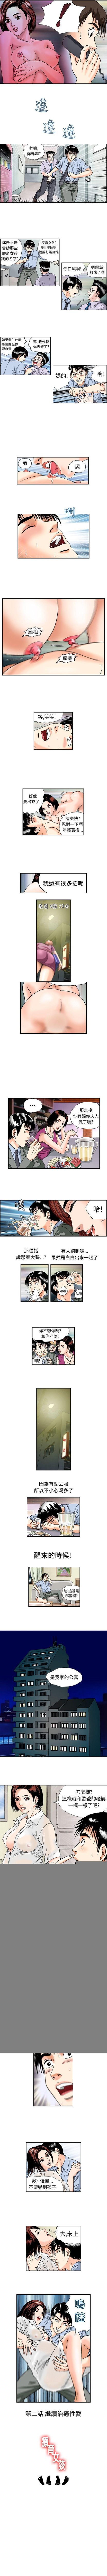 Facial 療育女孩 1-52 Chacal - Page 2